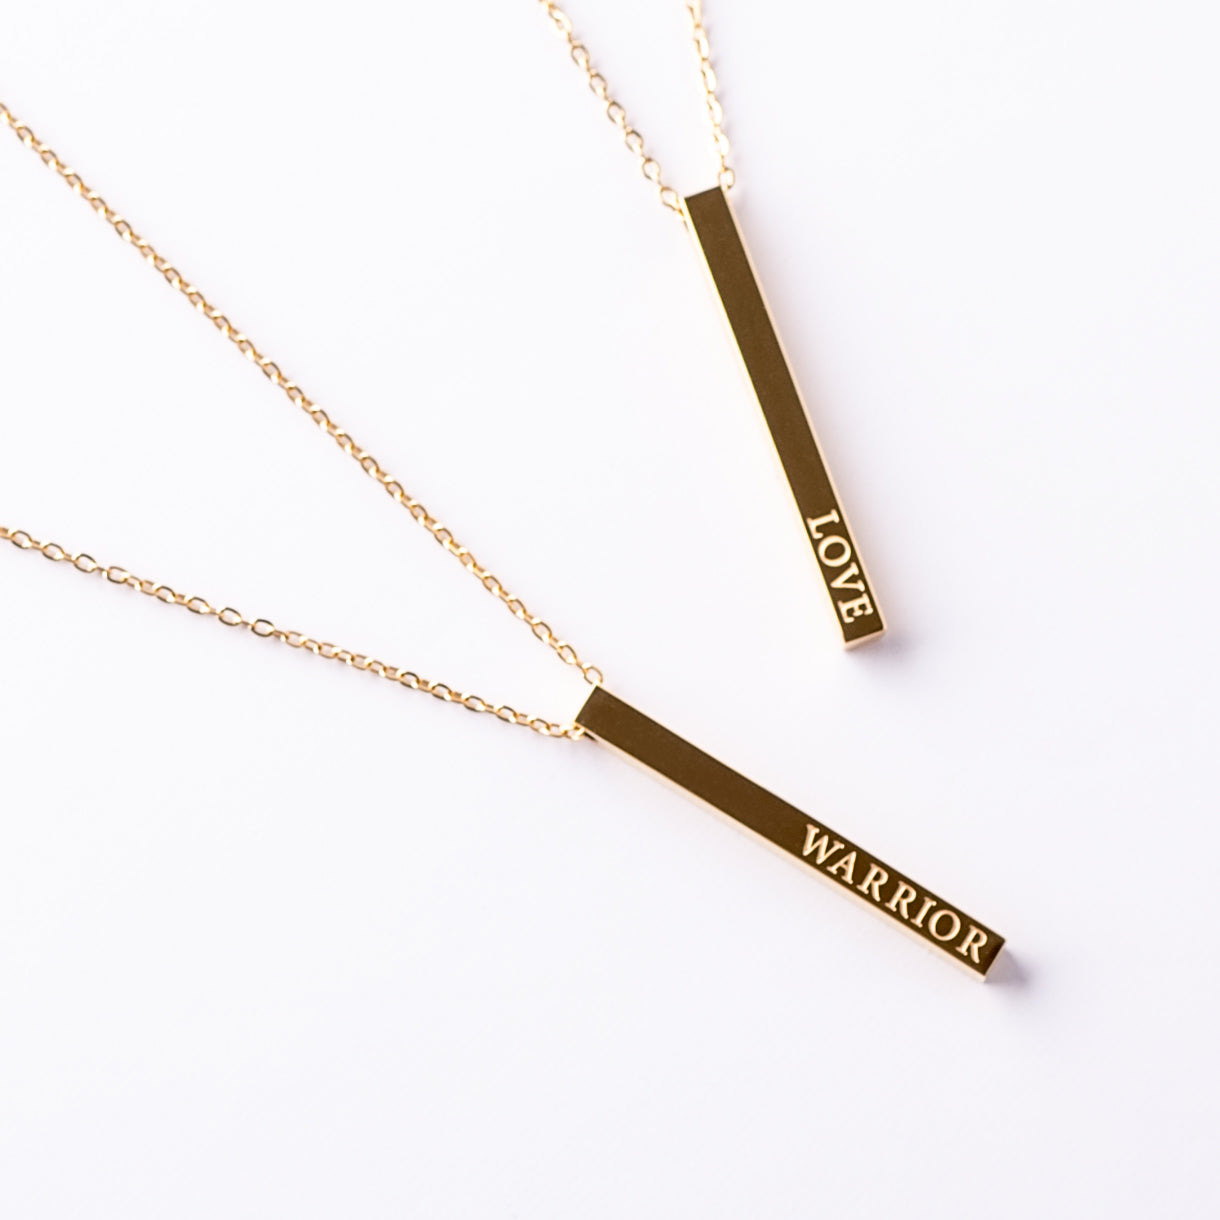 Gold I Am Enough Necklace, Bar Necklace, Empowerment Jewelry Silver bar necklace. Gold Bar Necklace Rose Gold Necklace Mental health jewelry healing jewelry, Mantra Jewelry, Cancer Gifts for Her, Warrior Necklace, Love necklace, Motivational Necklace, Affirmation jewelry, cancer gifts, Gold necklace for her, Pendant necklaces